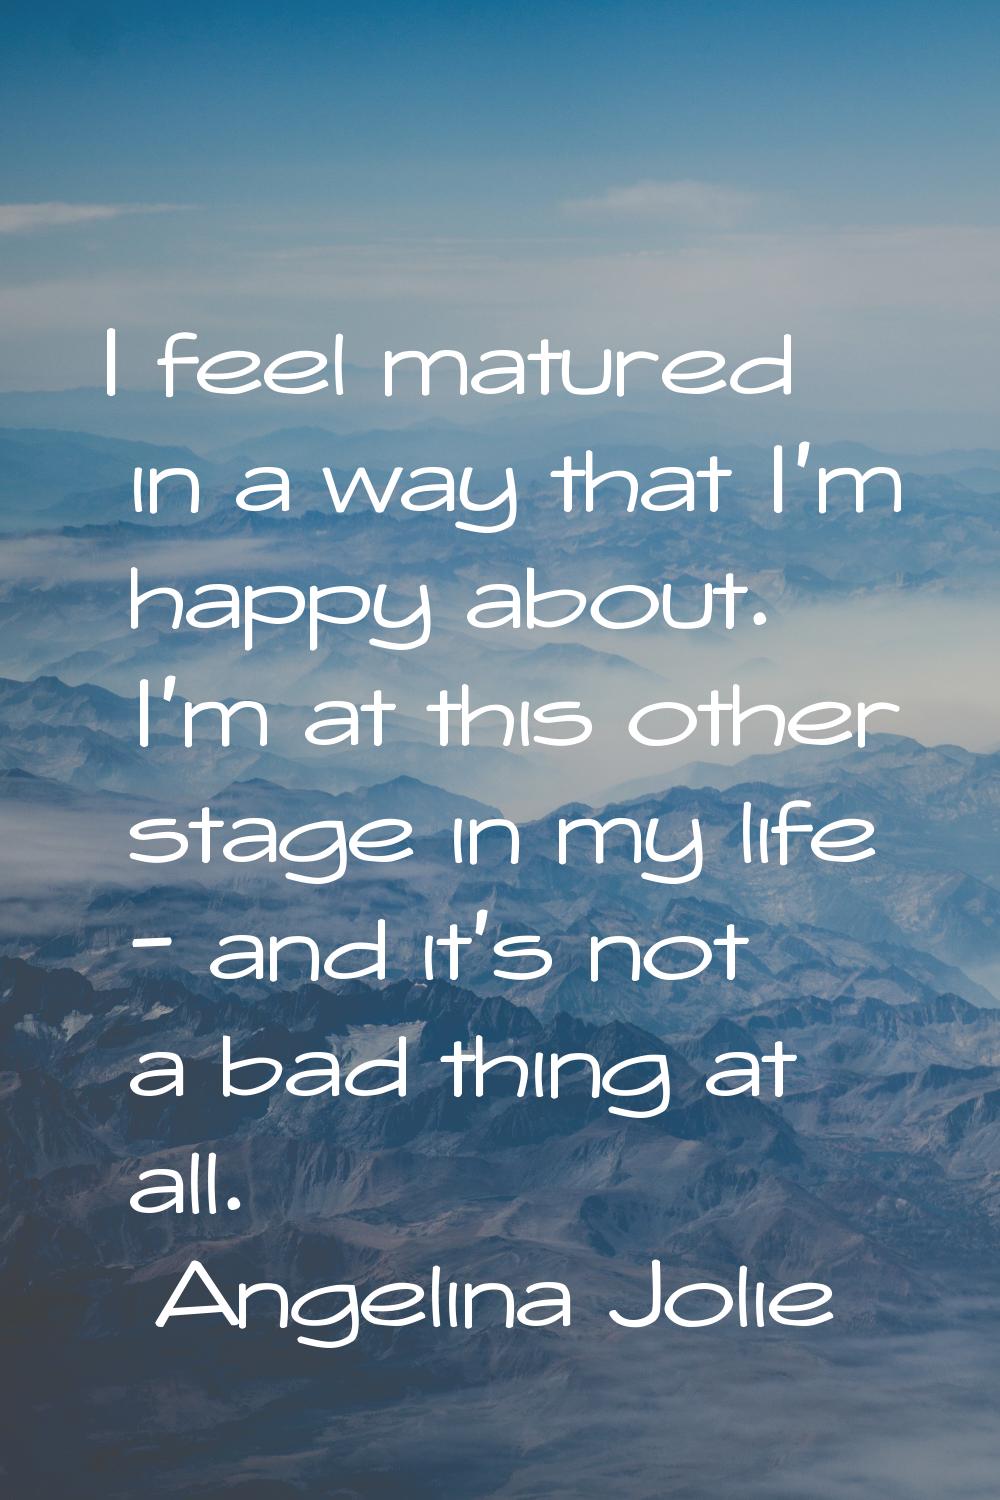 I feel matured in a way that I'm happy about. I'm at this other stage in my life - and it's not a b